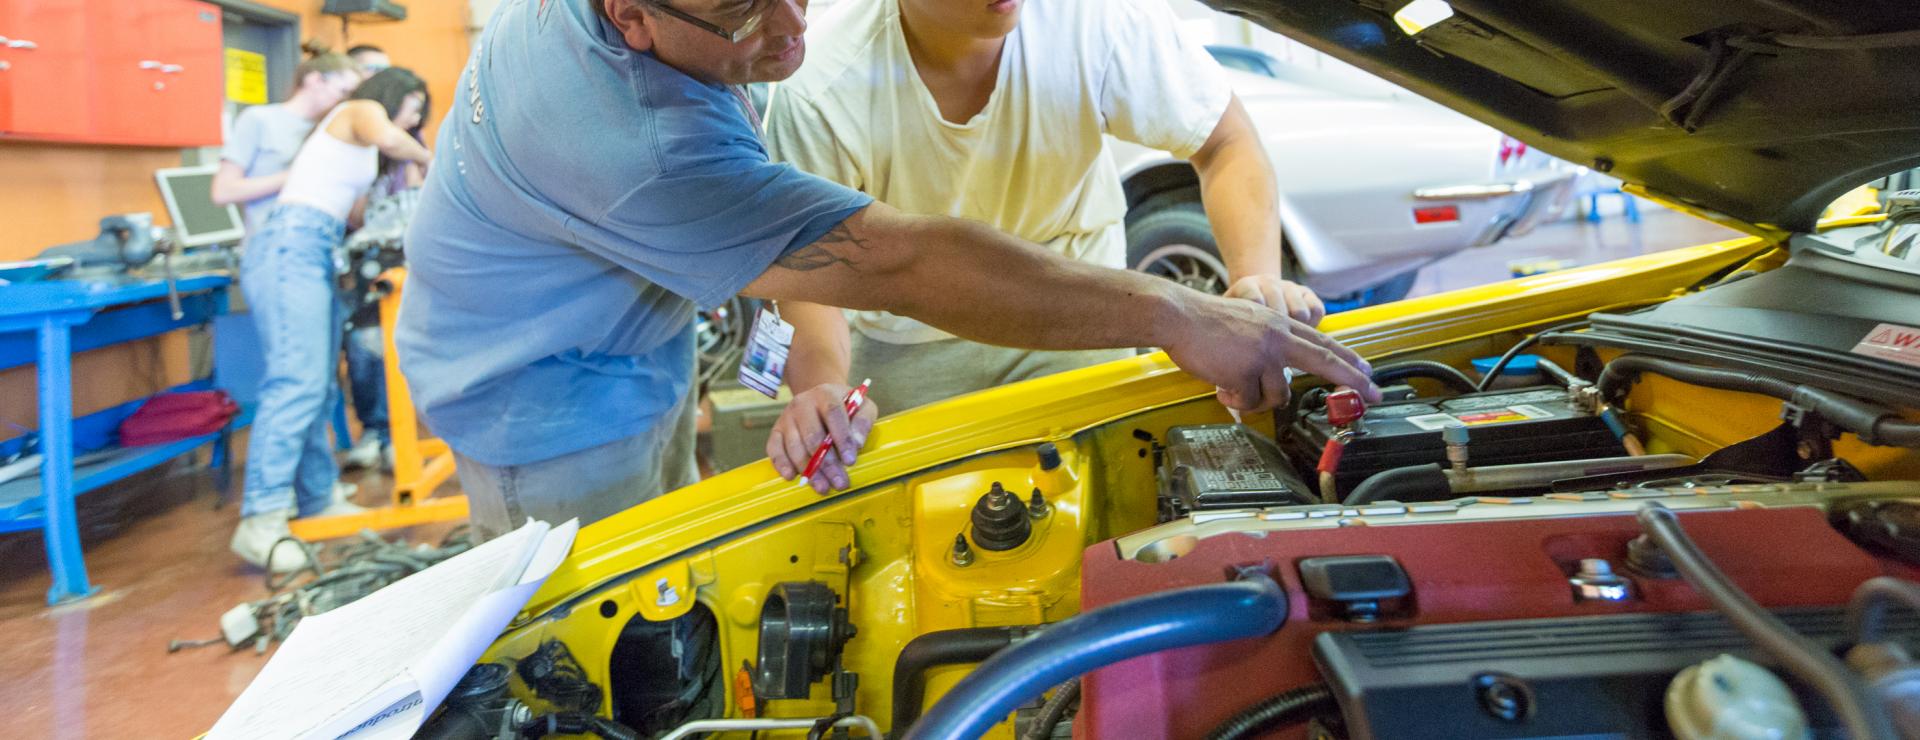 Auto Tech instructor showing student how to check car battery